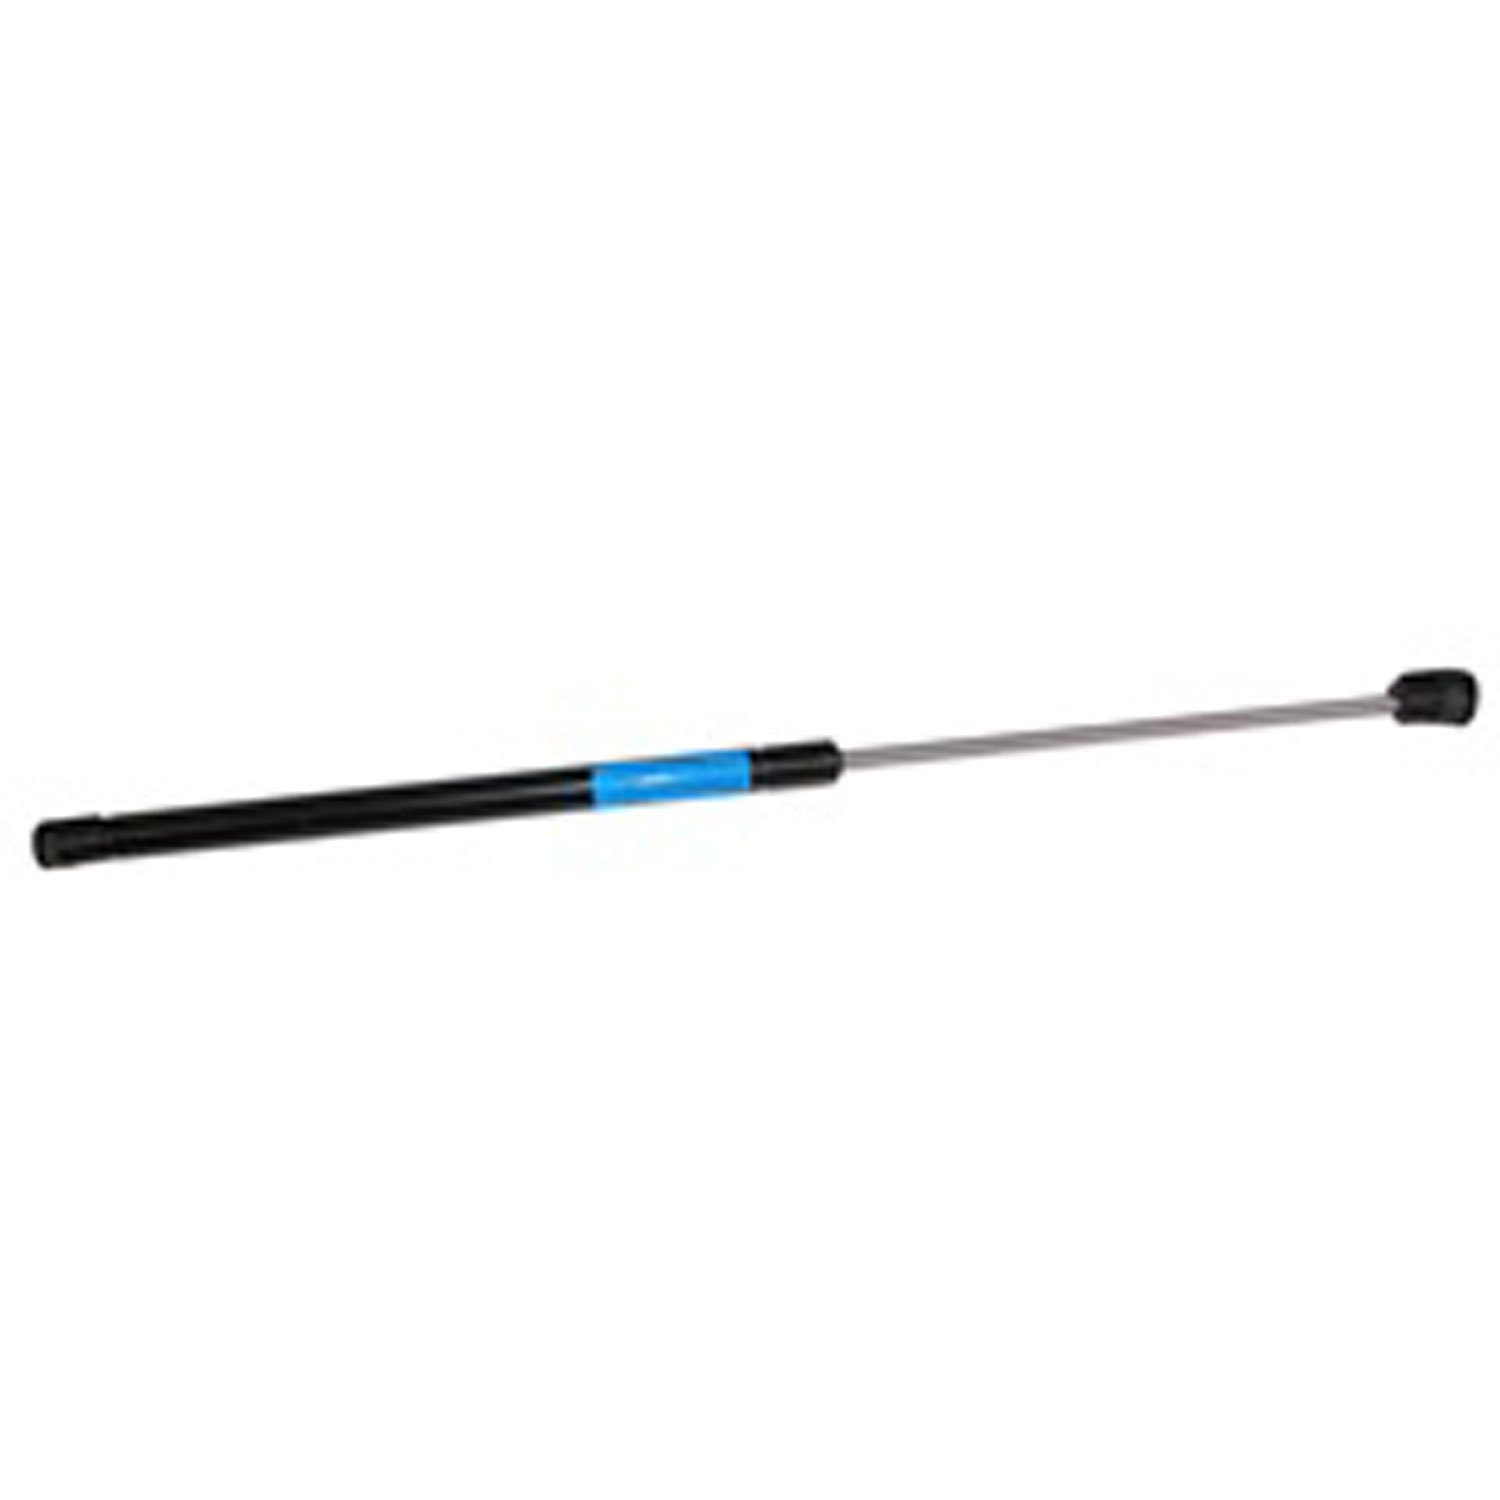 Replacement gas strut from Omix-ADA, Fits liftgate glass rear window on 93-98 Jeep Grand Che